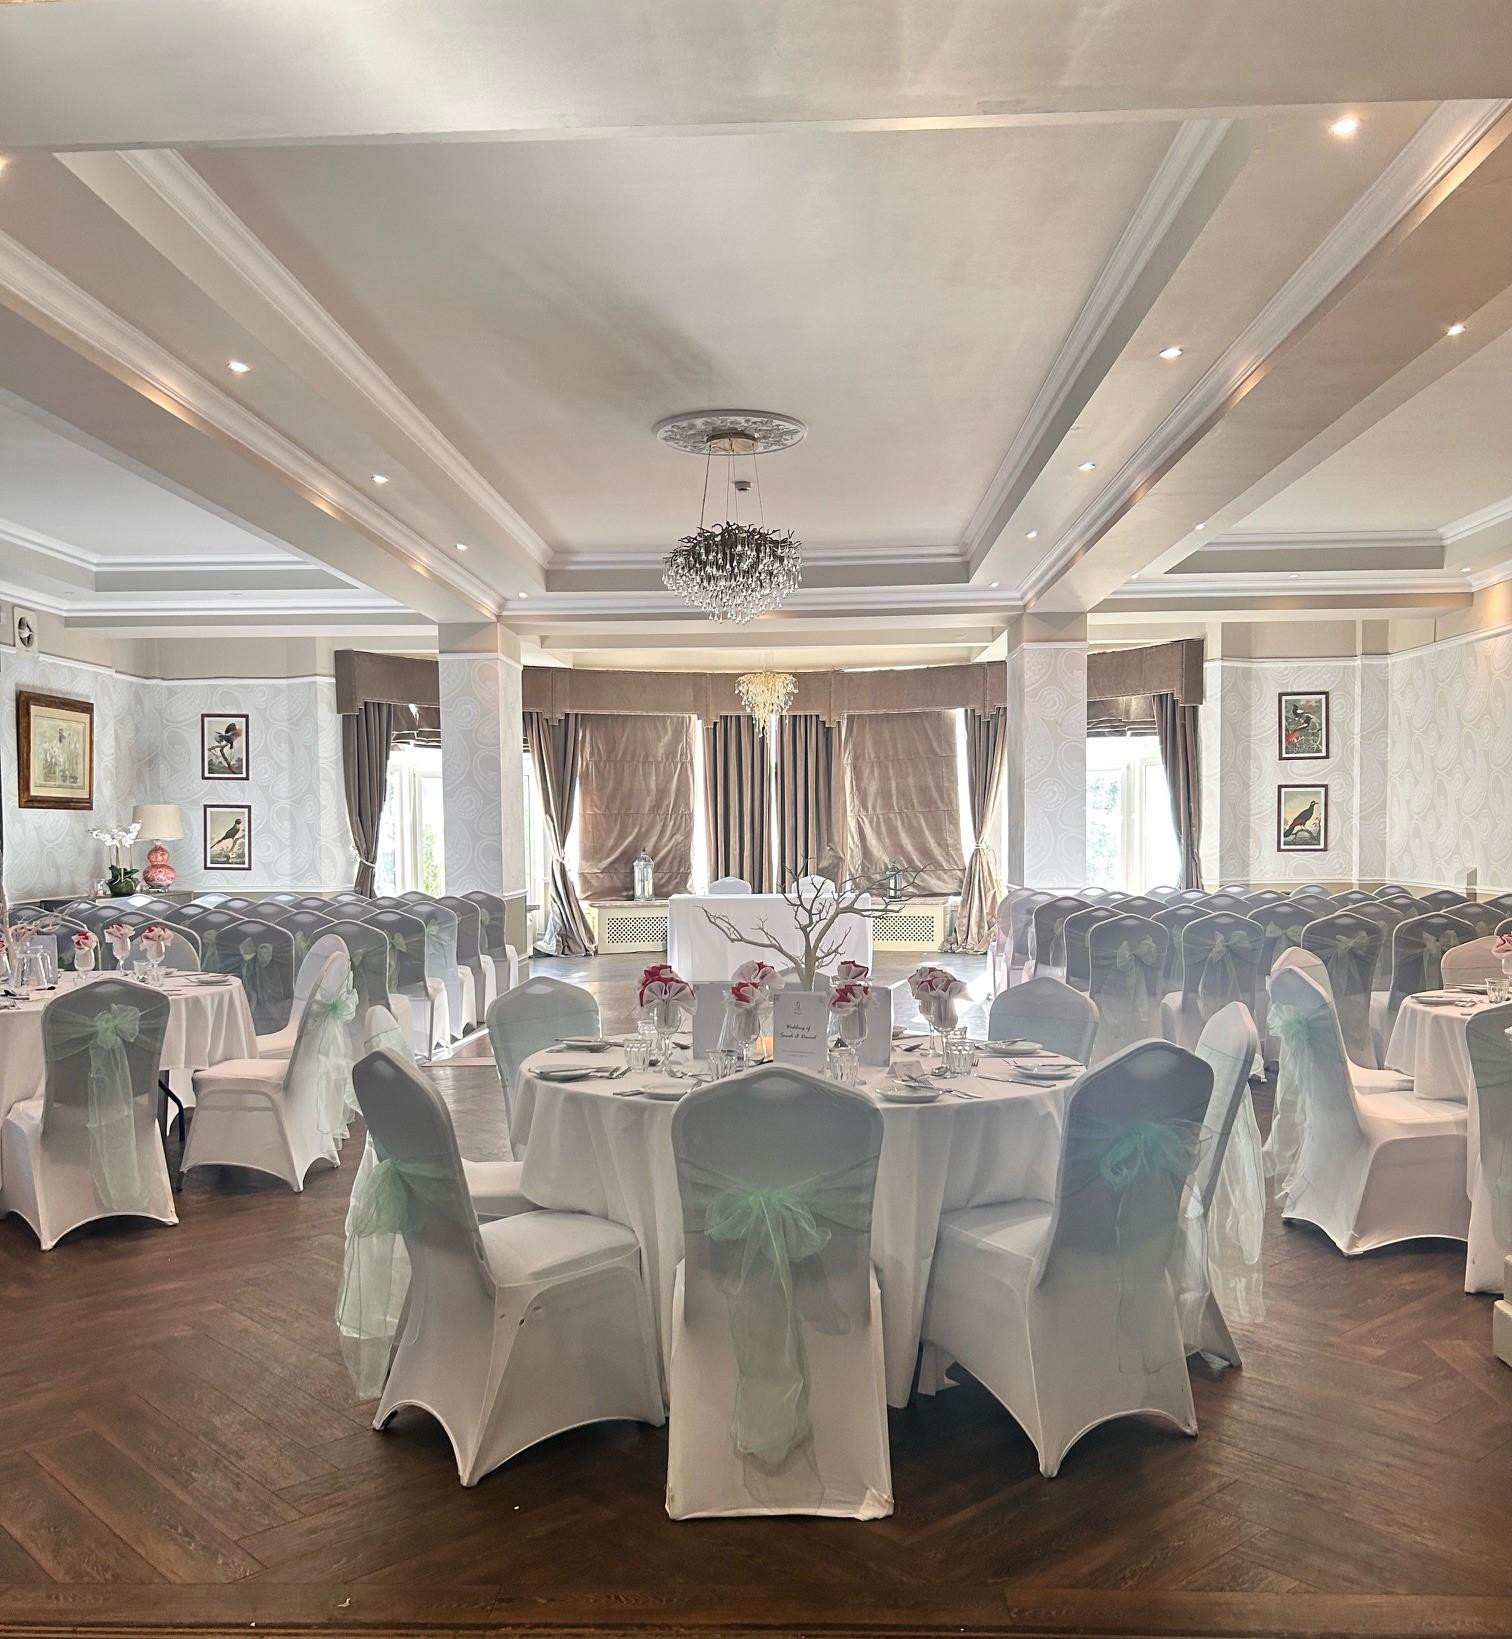 The Queens Hotel Bournemouth, The Purbeck Suite photo #1